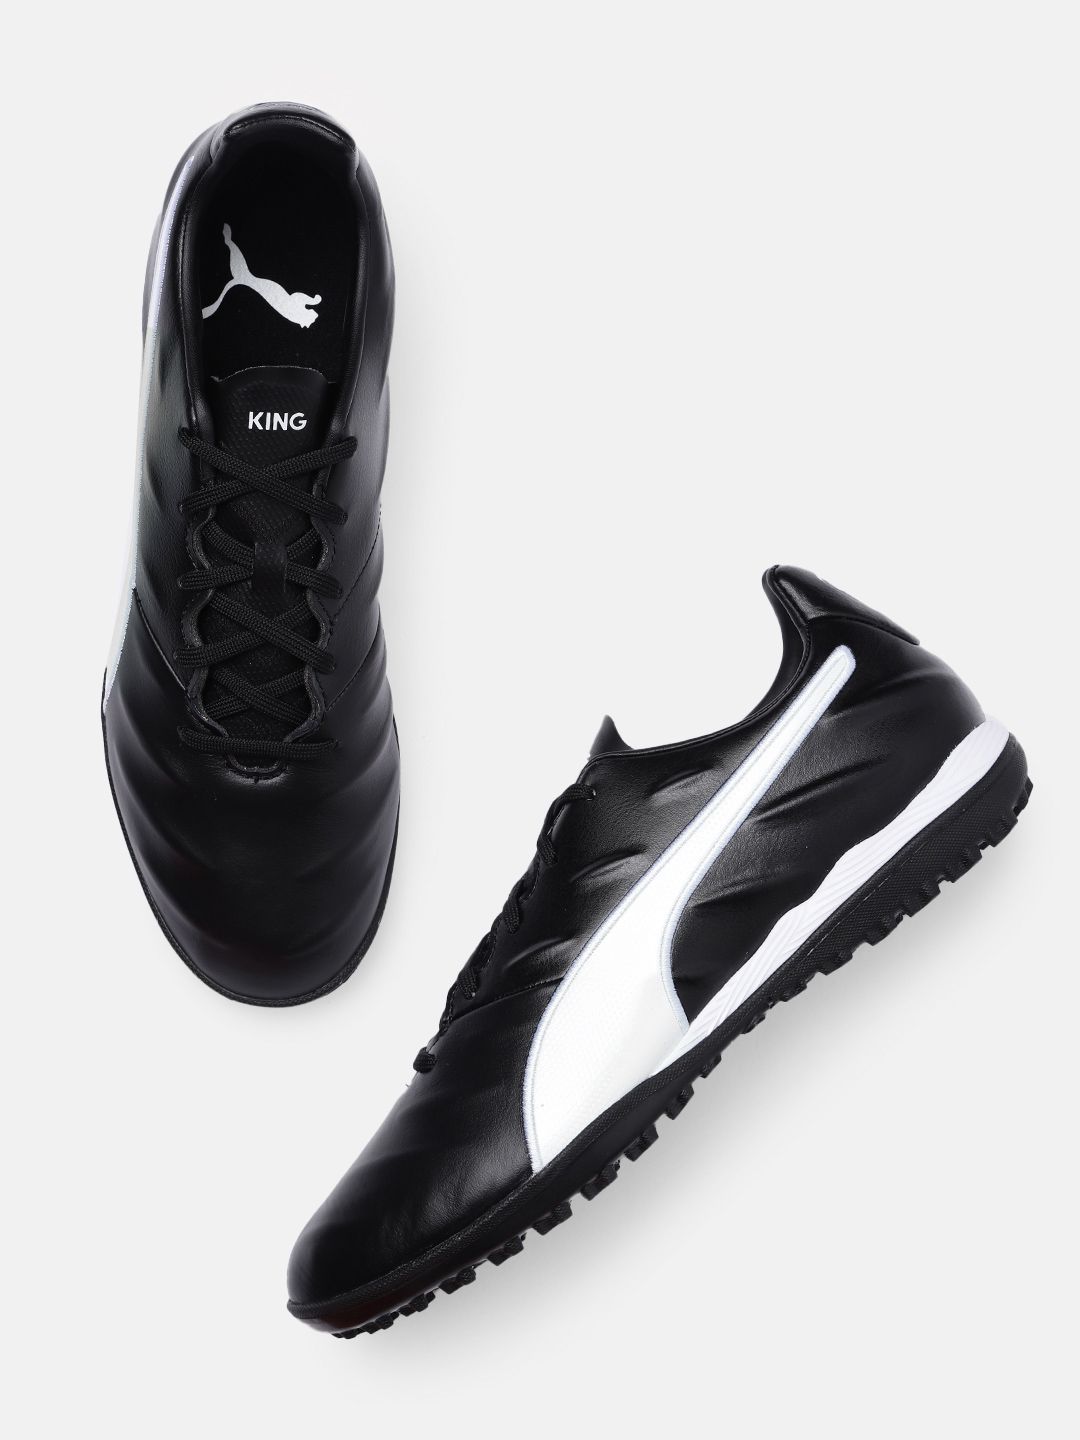 Puma Unisex Black KING Pro 21 Leather Football Shoes Price in India